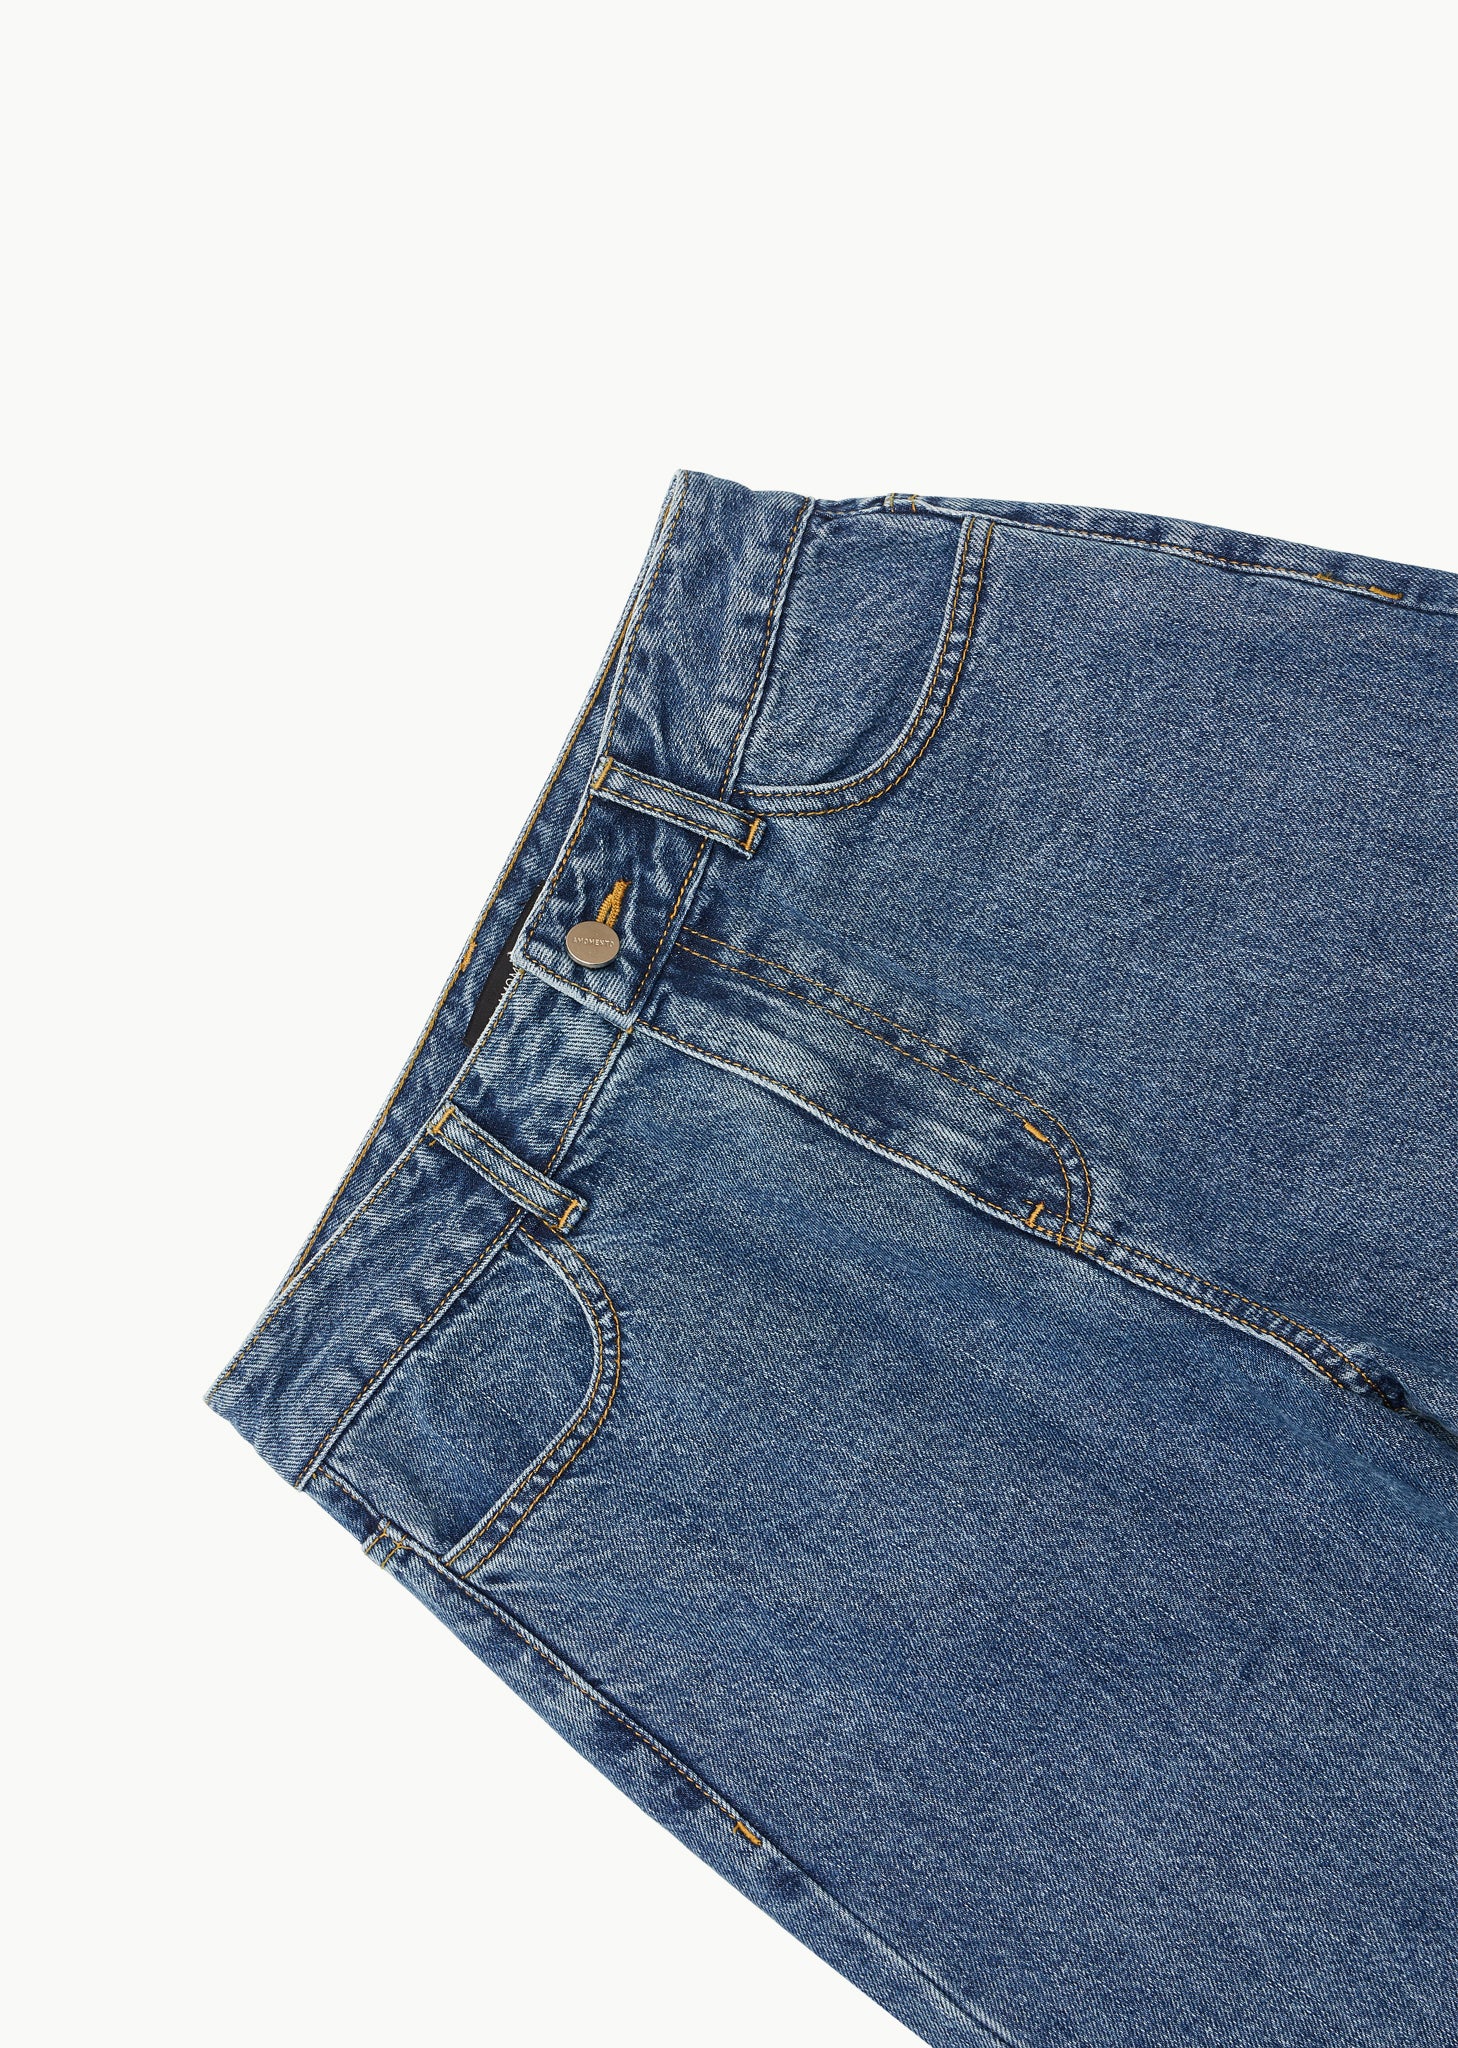 RECYCLED COTTON DENIM (2 COLORS)